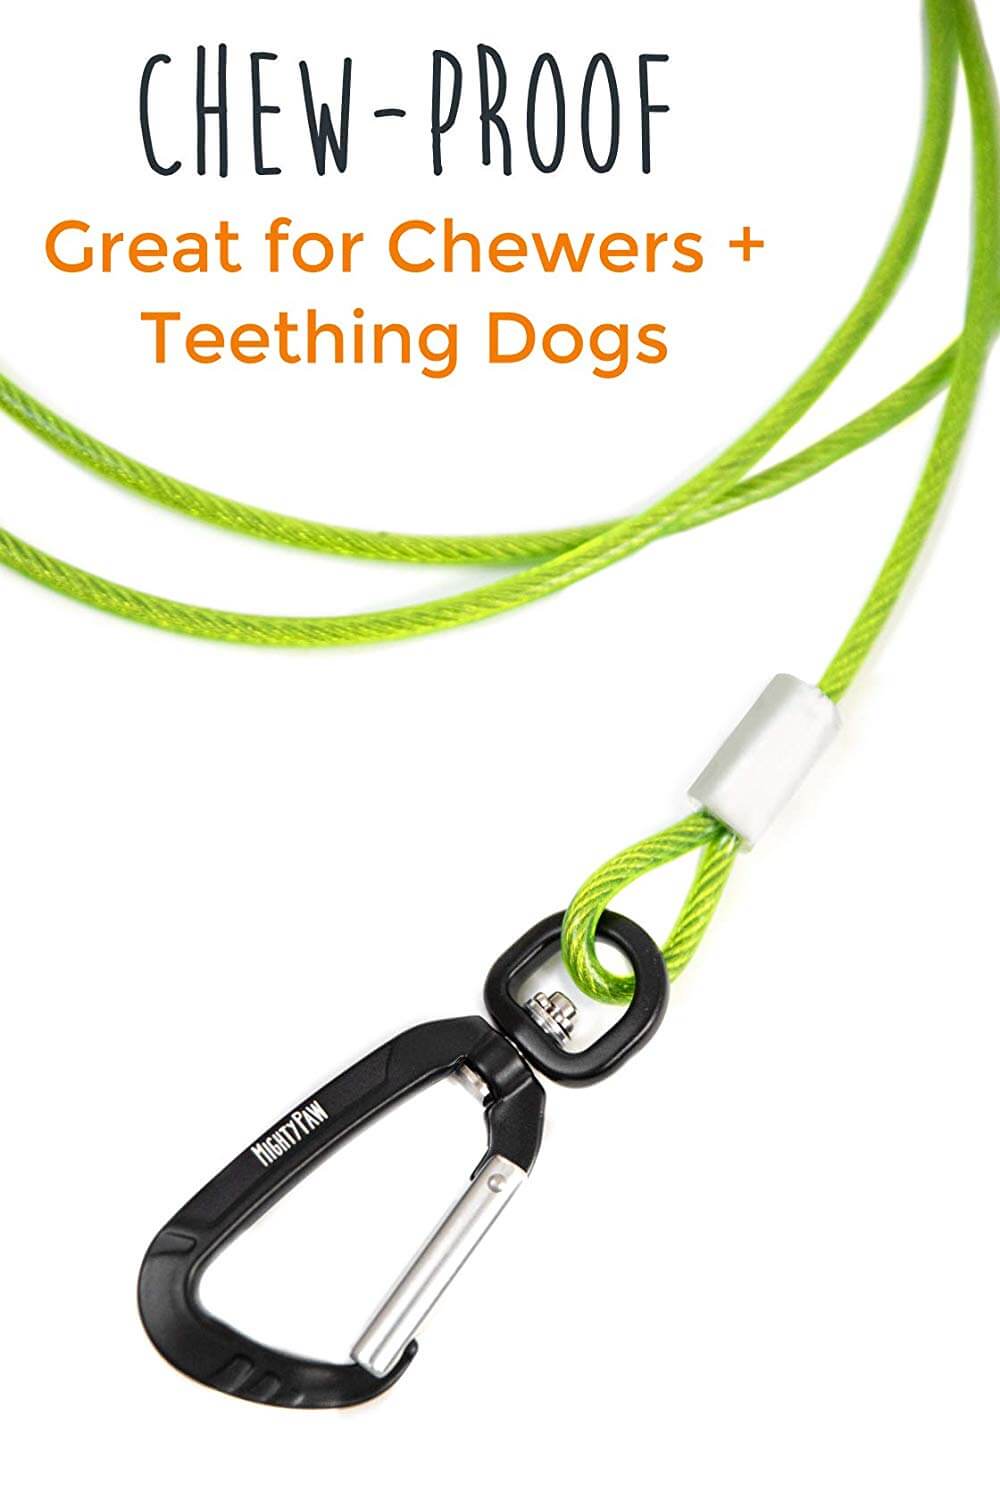 6' Chew Proof Cable Leash - Steel Braided Cable & Padded Handle